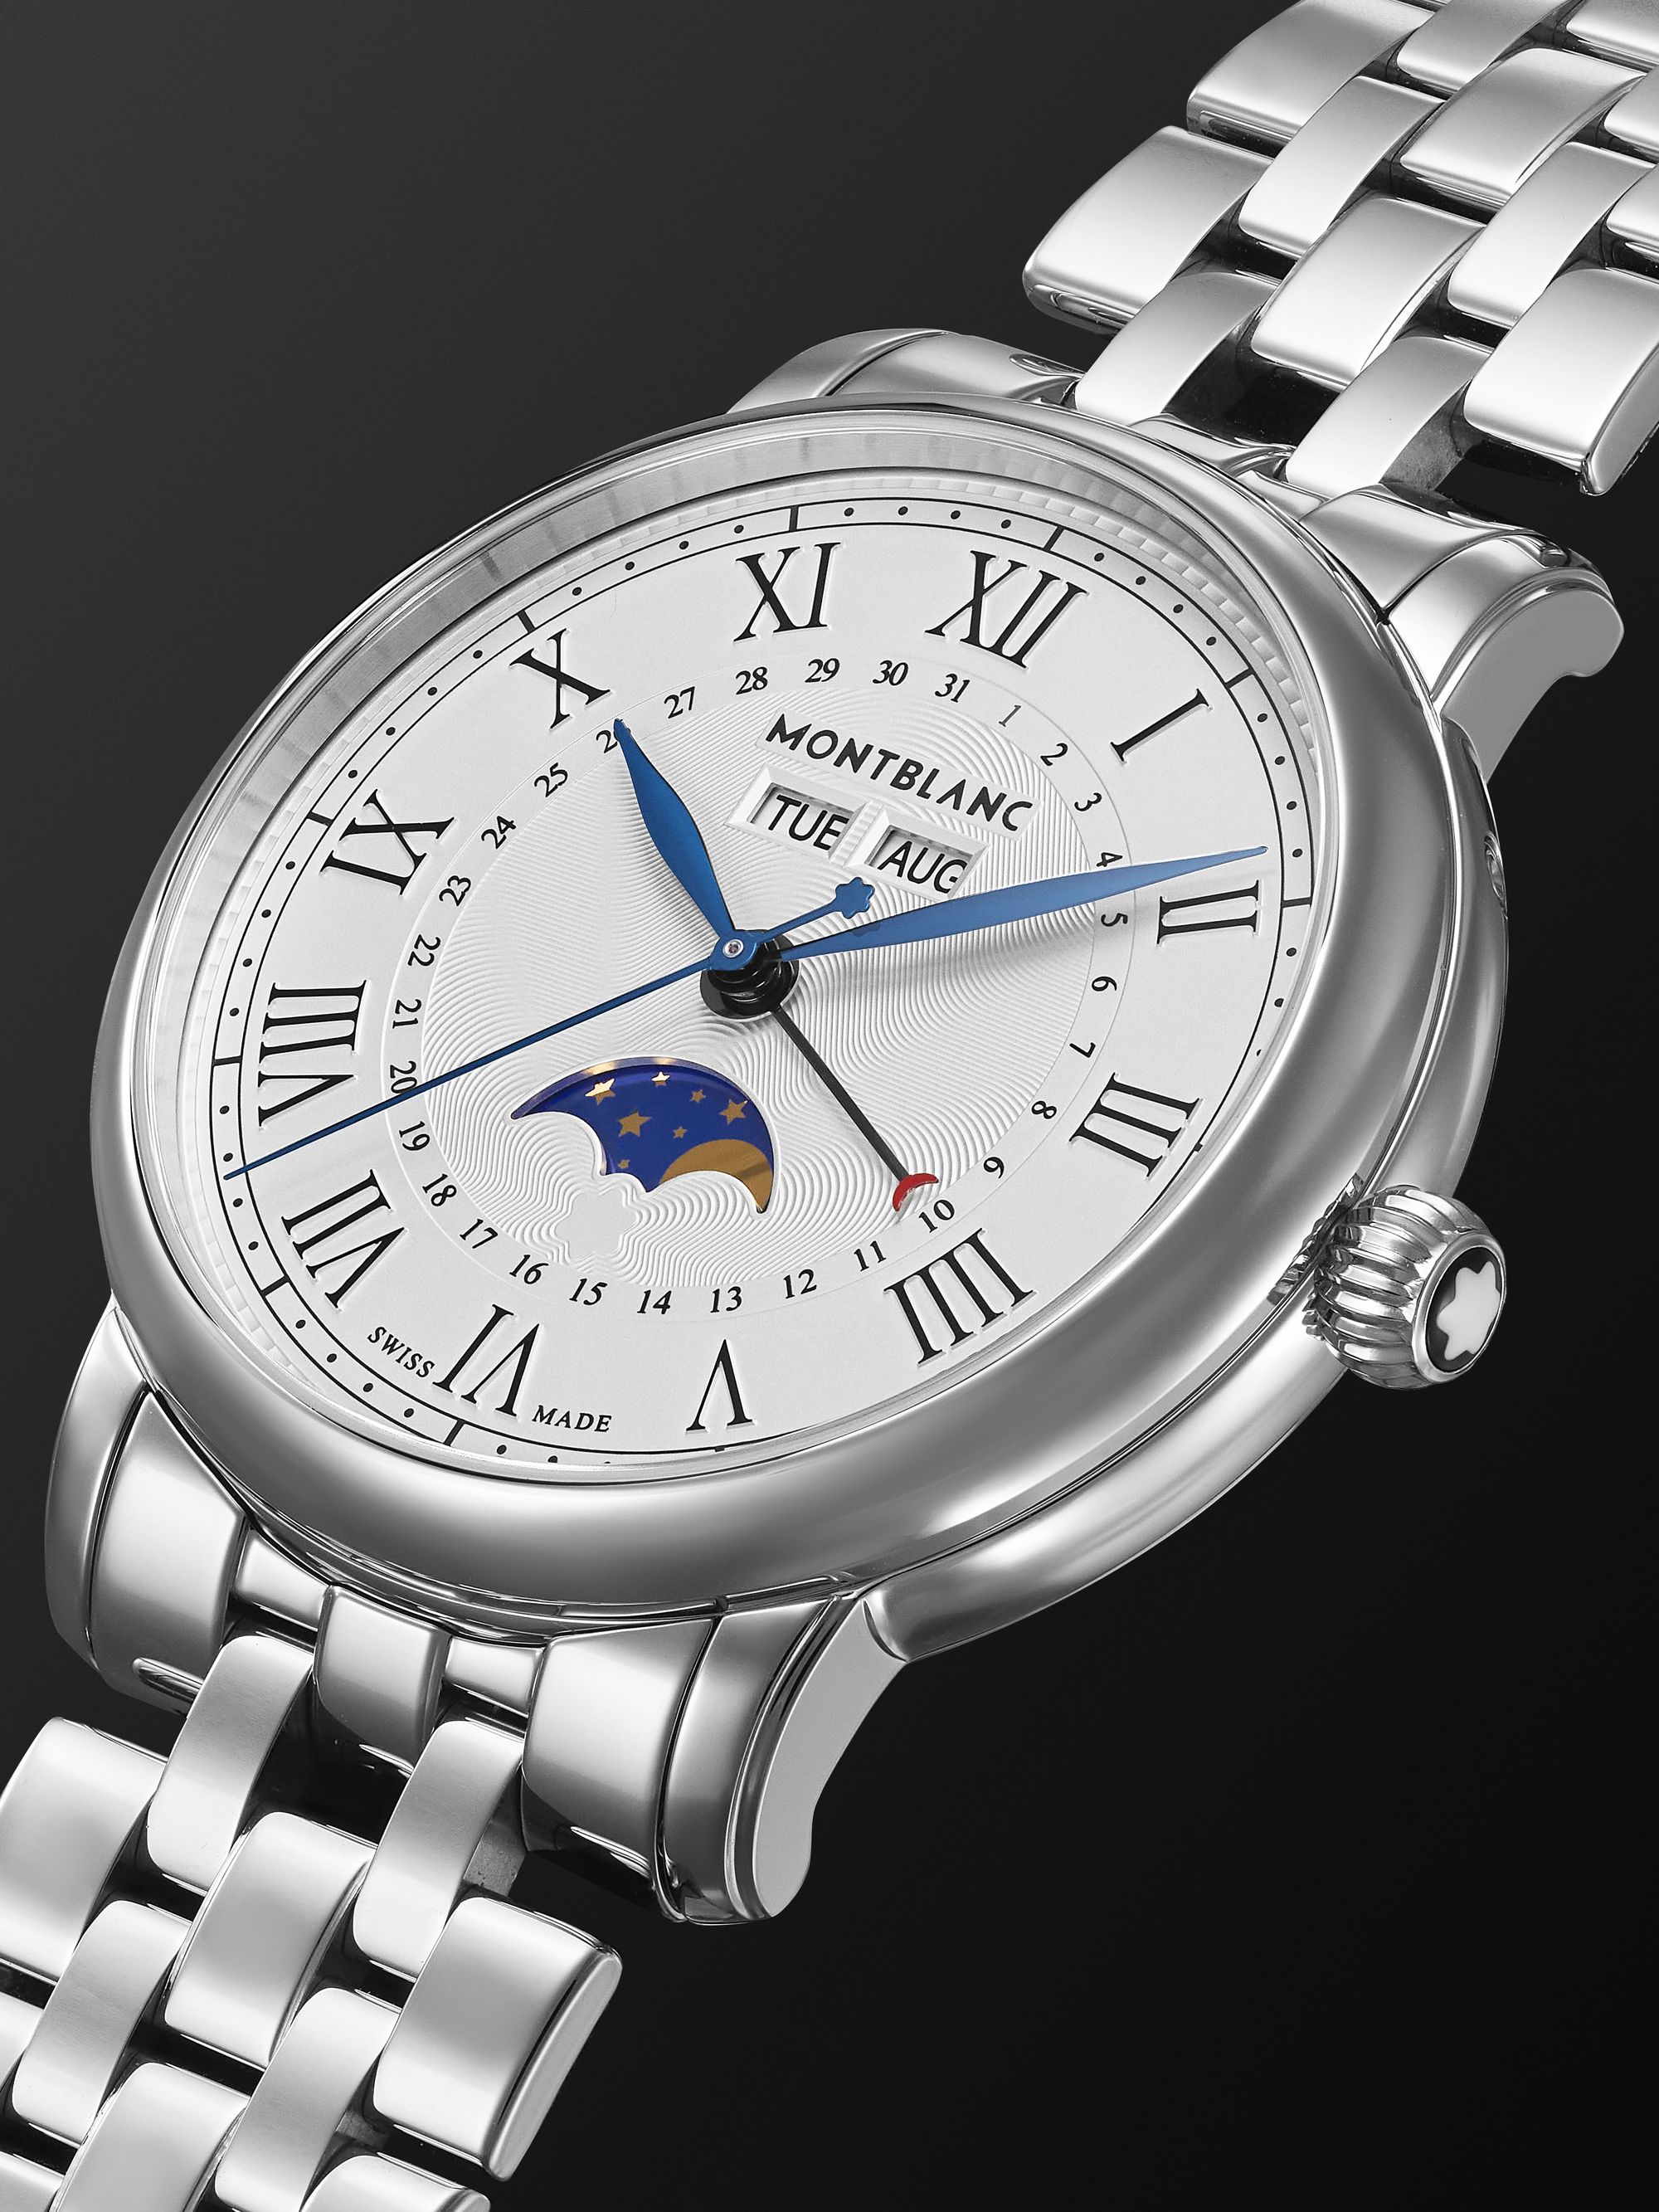 MONTBLANC Star Legacy Full Calendar Automatic Moon-Phase 42mm Stainless Steel Watch, Ref. No. 128677